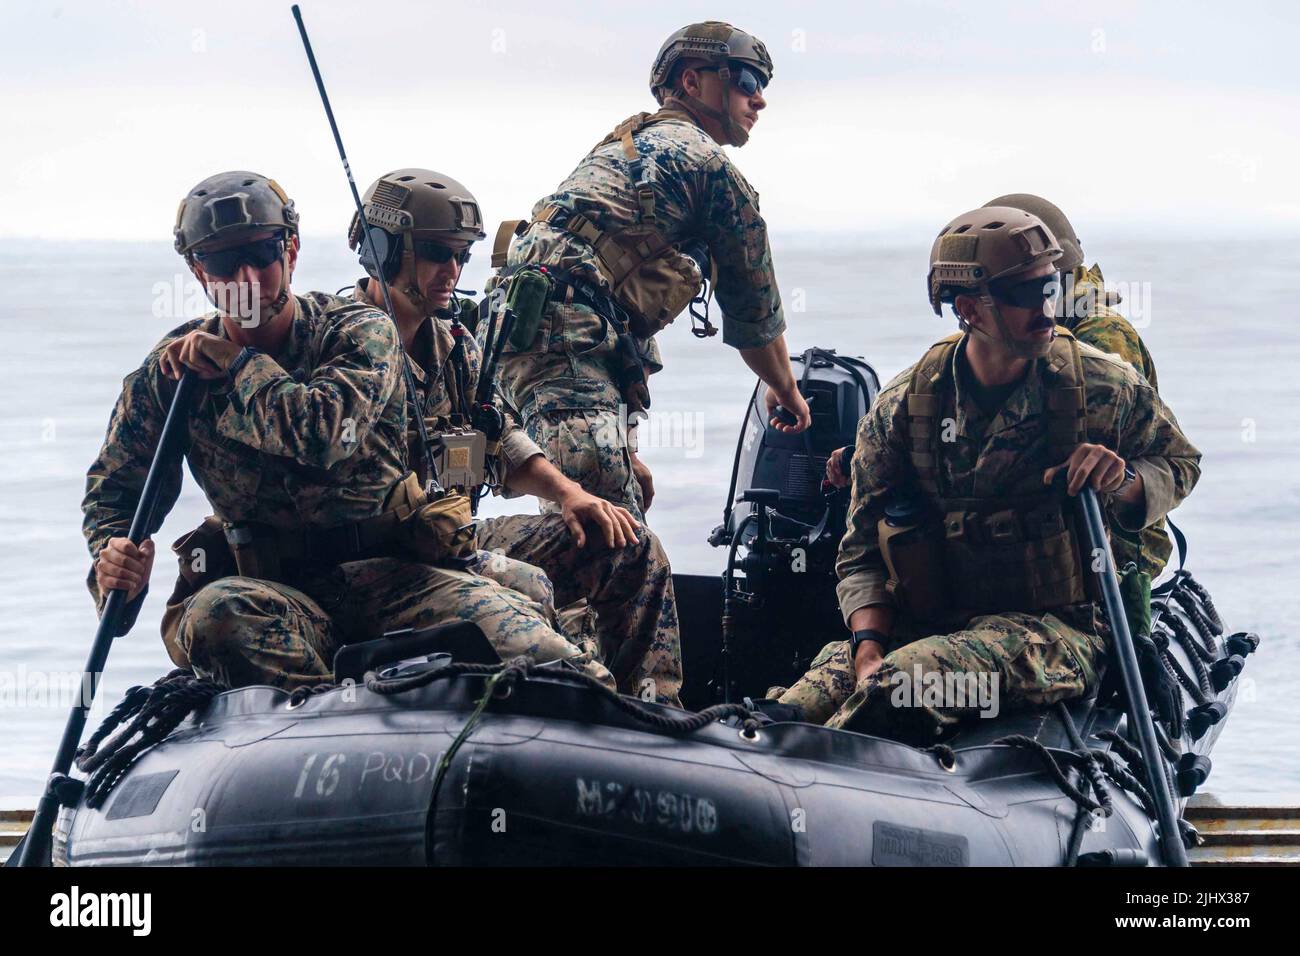 Pacific Ocean. 14th July, 2022. Marines assigned to Explosive Ordnance Disposal (EOD) Mobile Unit 1 prepare to launch a combat rubber raiding craft (CRRC) from the well deck of San Antonio-class amphibious transport dock ship USS Portland (LPD 27) for a raise-tow-beach (RTB) mine exploitation exercise as part of Rim of the Pacific (RIMPAC) in Southern California. Twenty-six nations, 38 ships, four submarines, more than 170 aircraft and 25,000 personnel are participating in RIMPAC from June 29 to Aug. 4 in and around the Hawaiian Islands and Southern California. The world's largest internati Stock Photo